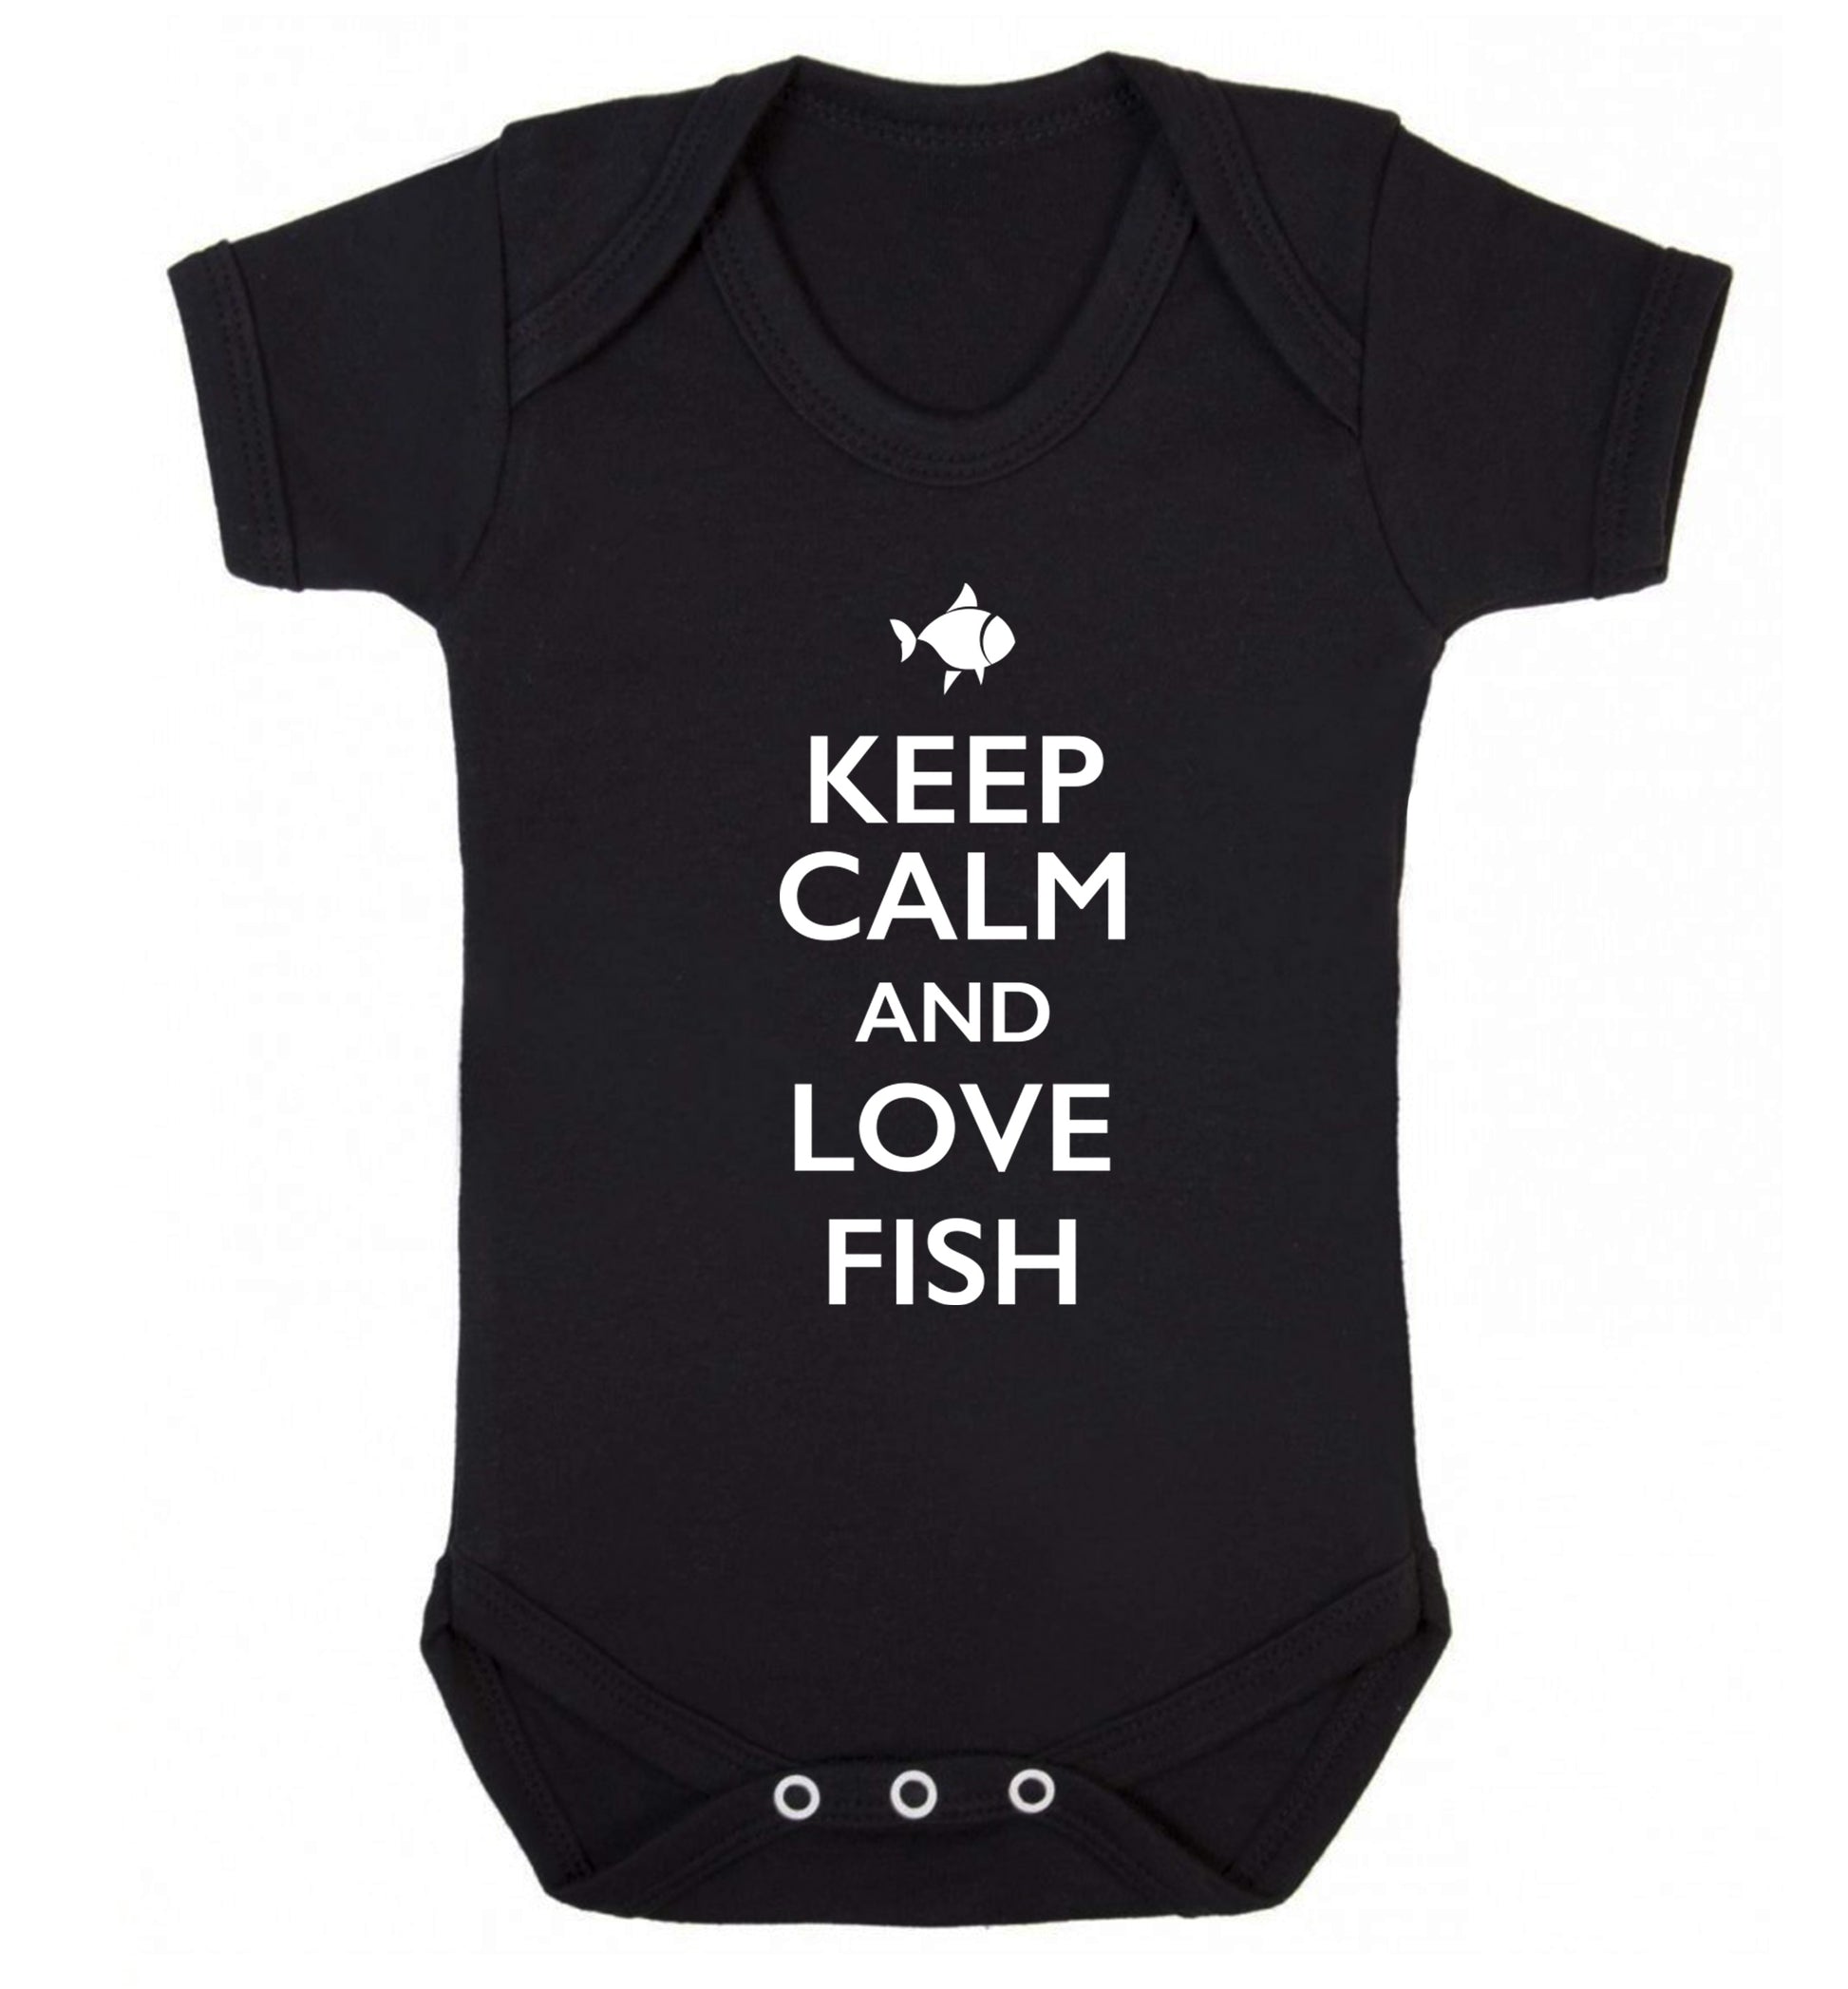 Keep calm and love fish Baby Vest black 18-24 months